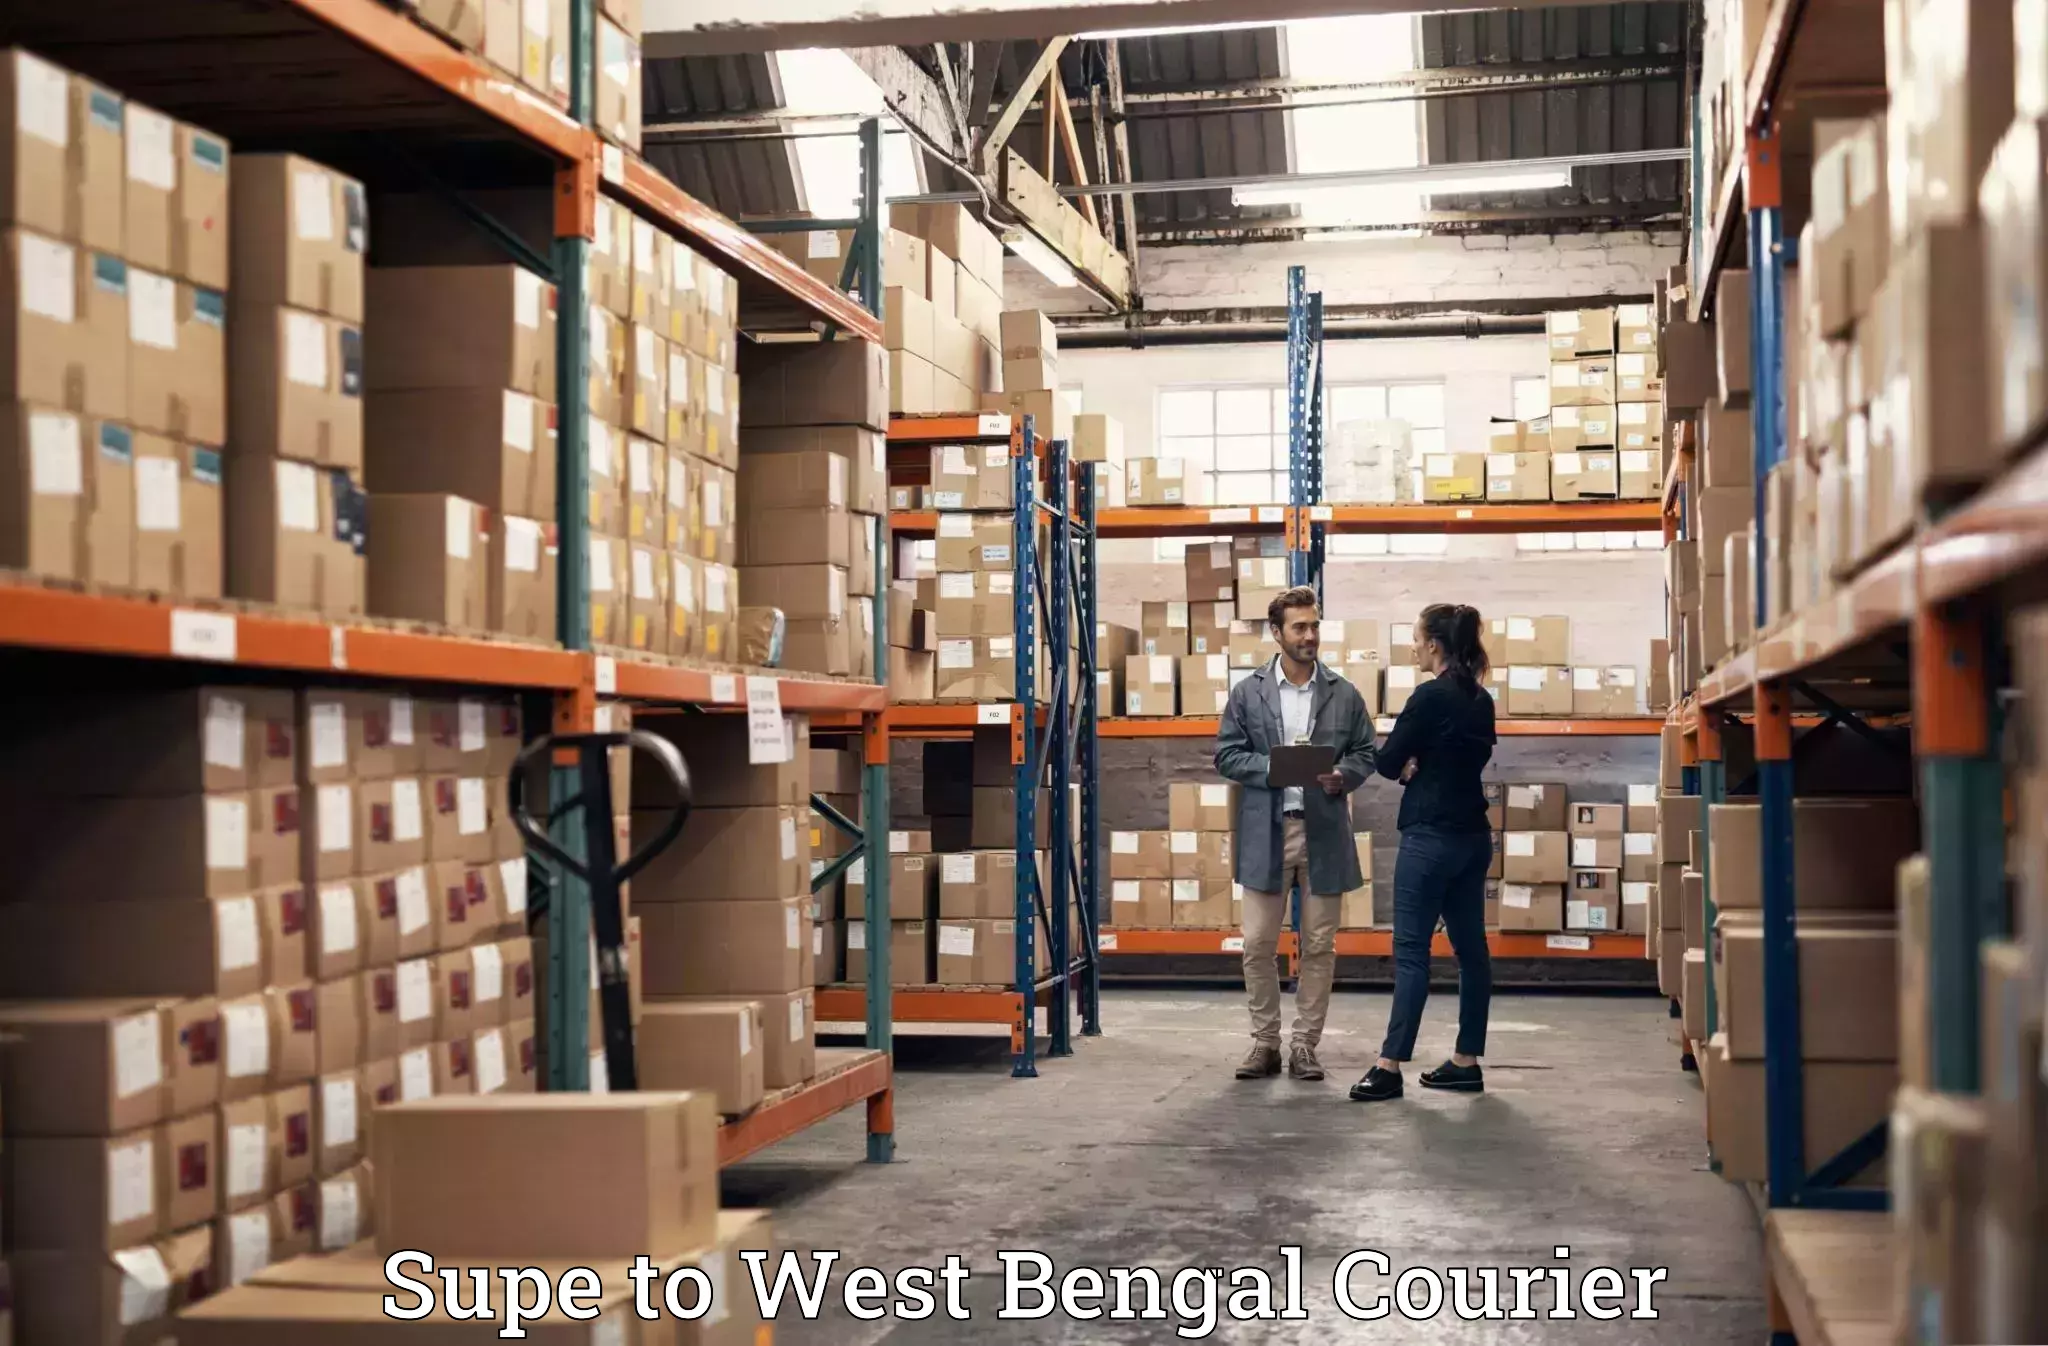 Luggage transport service Supe to West Bengal